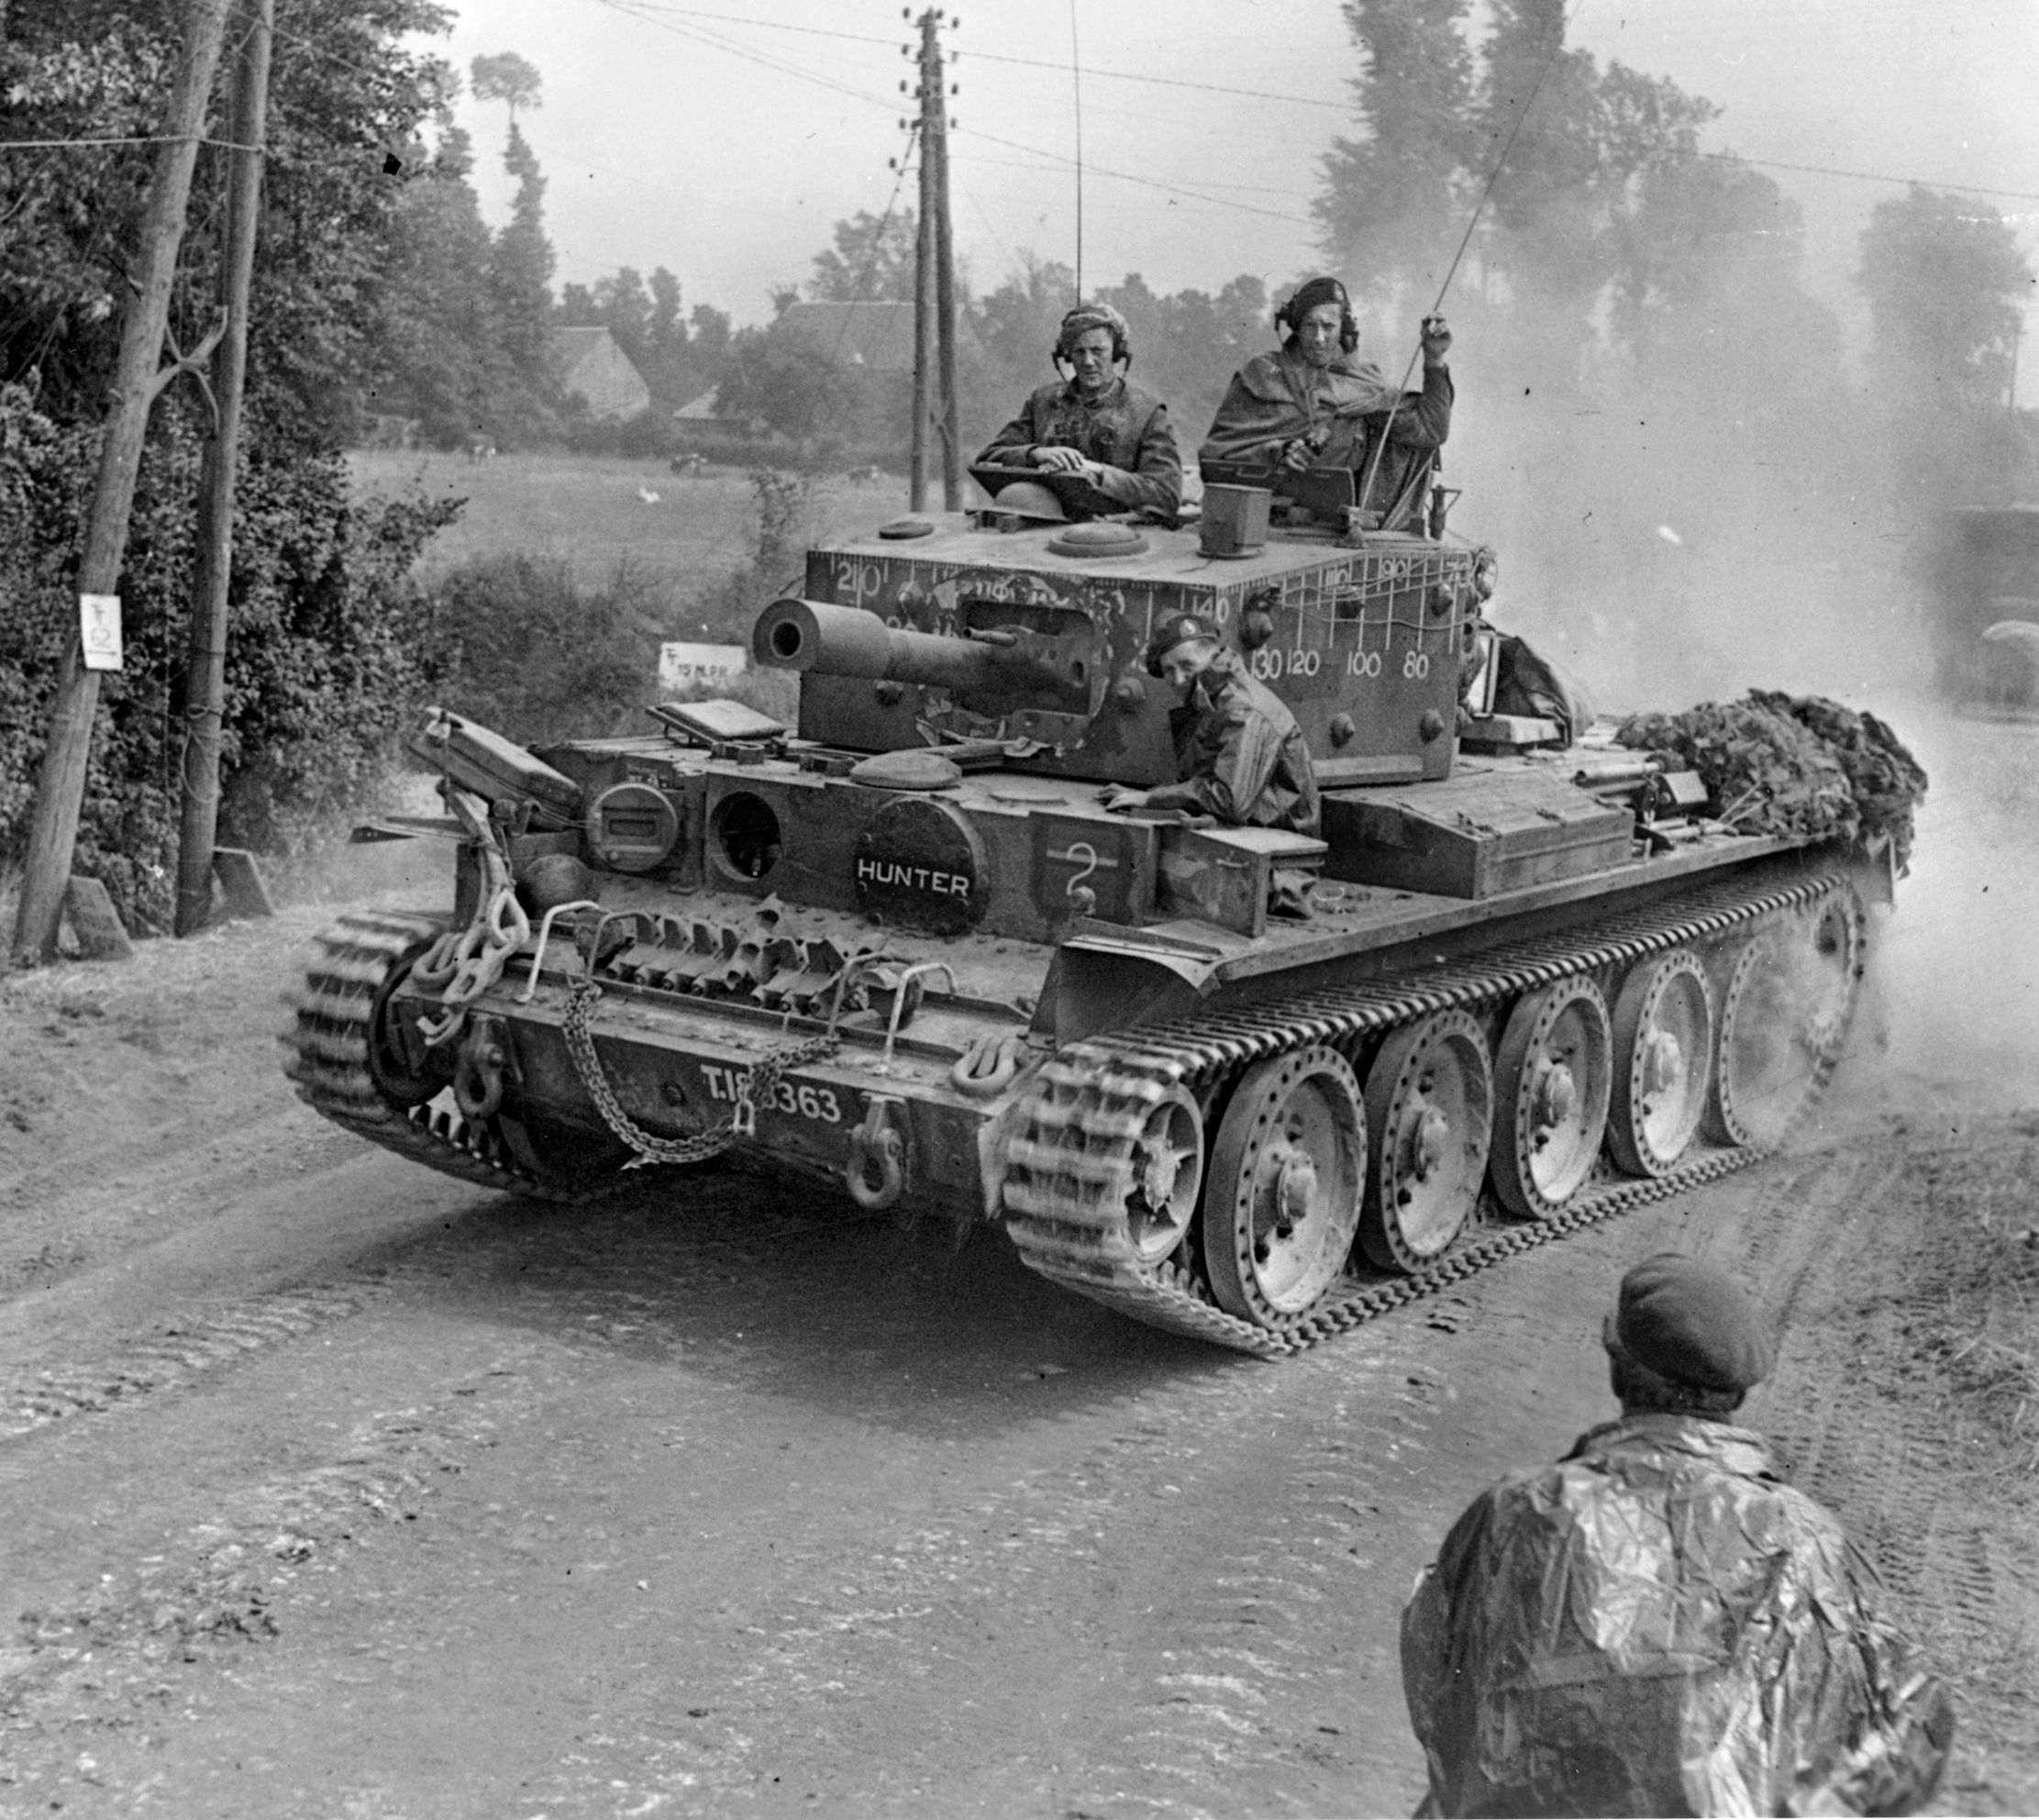 During the British advance of July 13, 1944, near Tilly-sur-Seules, a British Cromwell tank stirs up a cloud of dust.